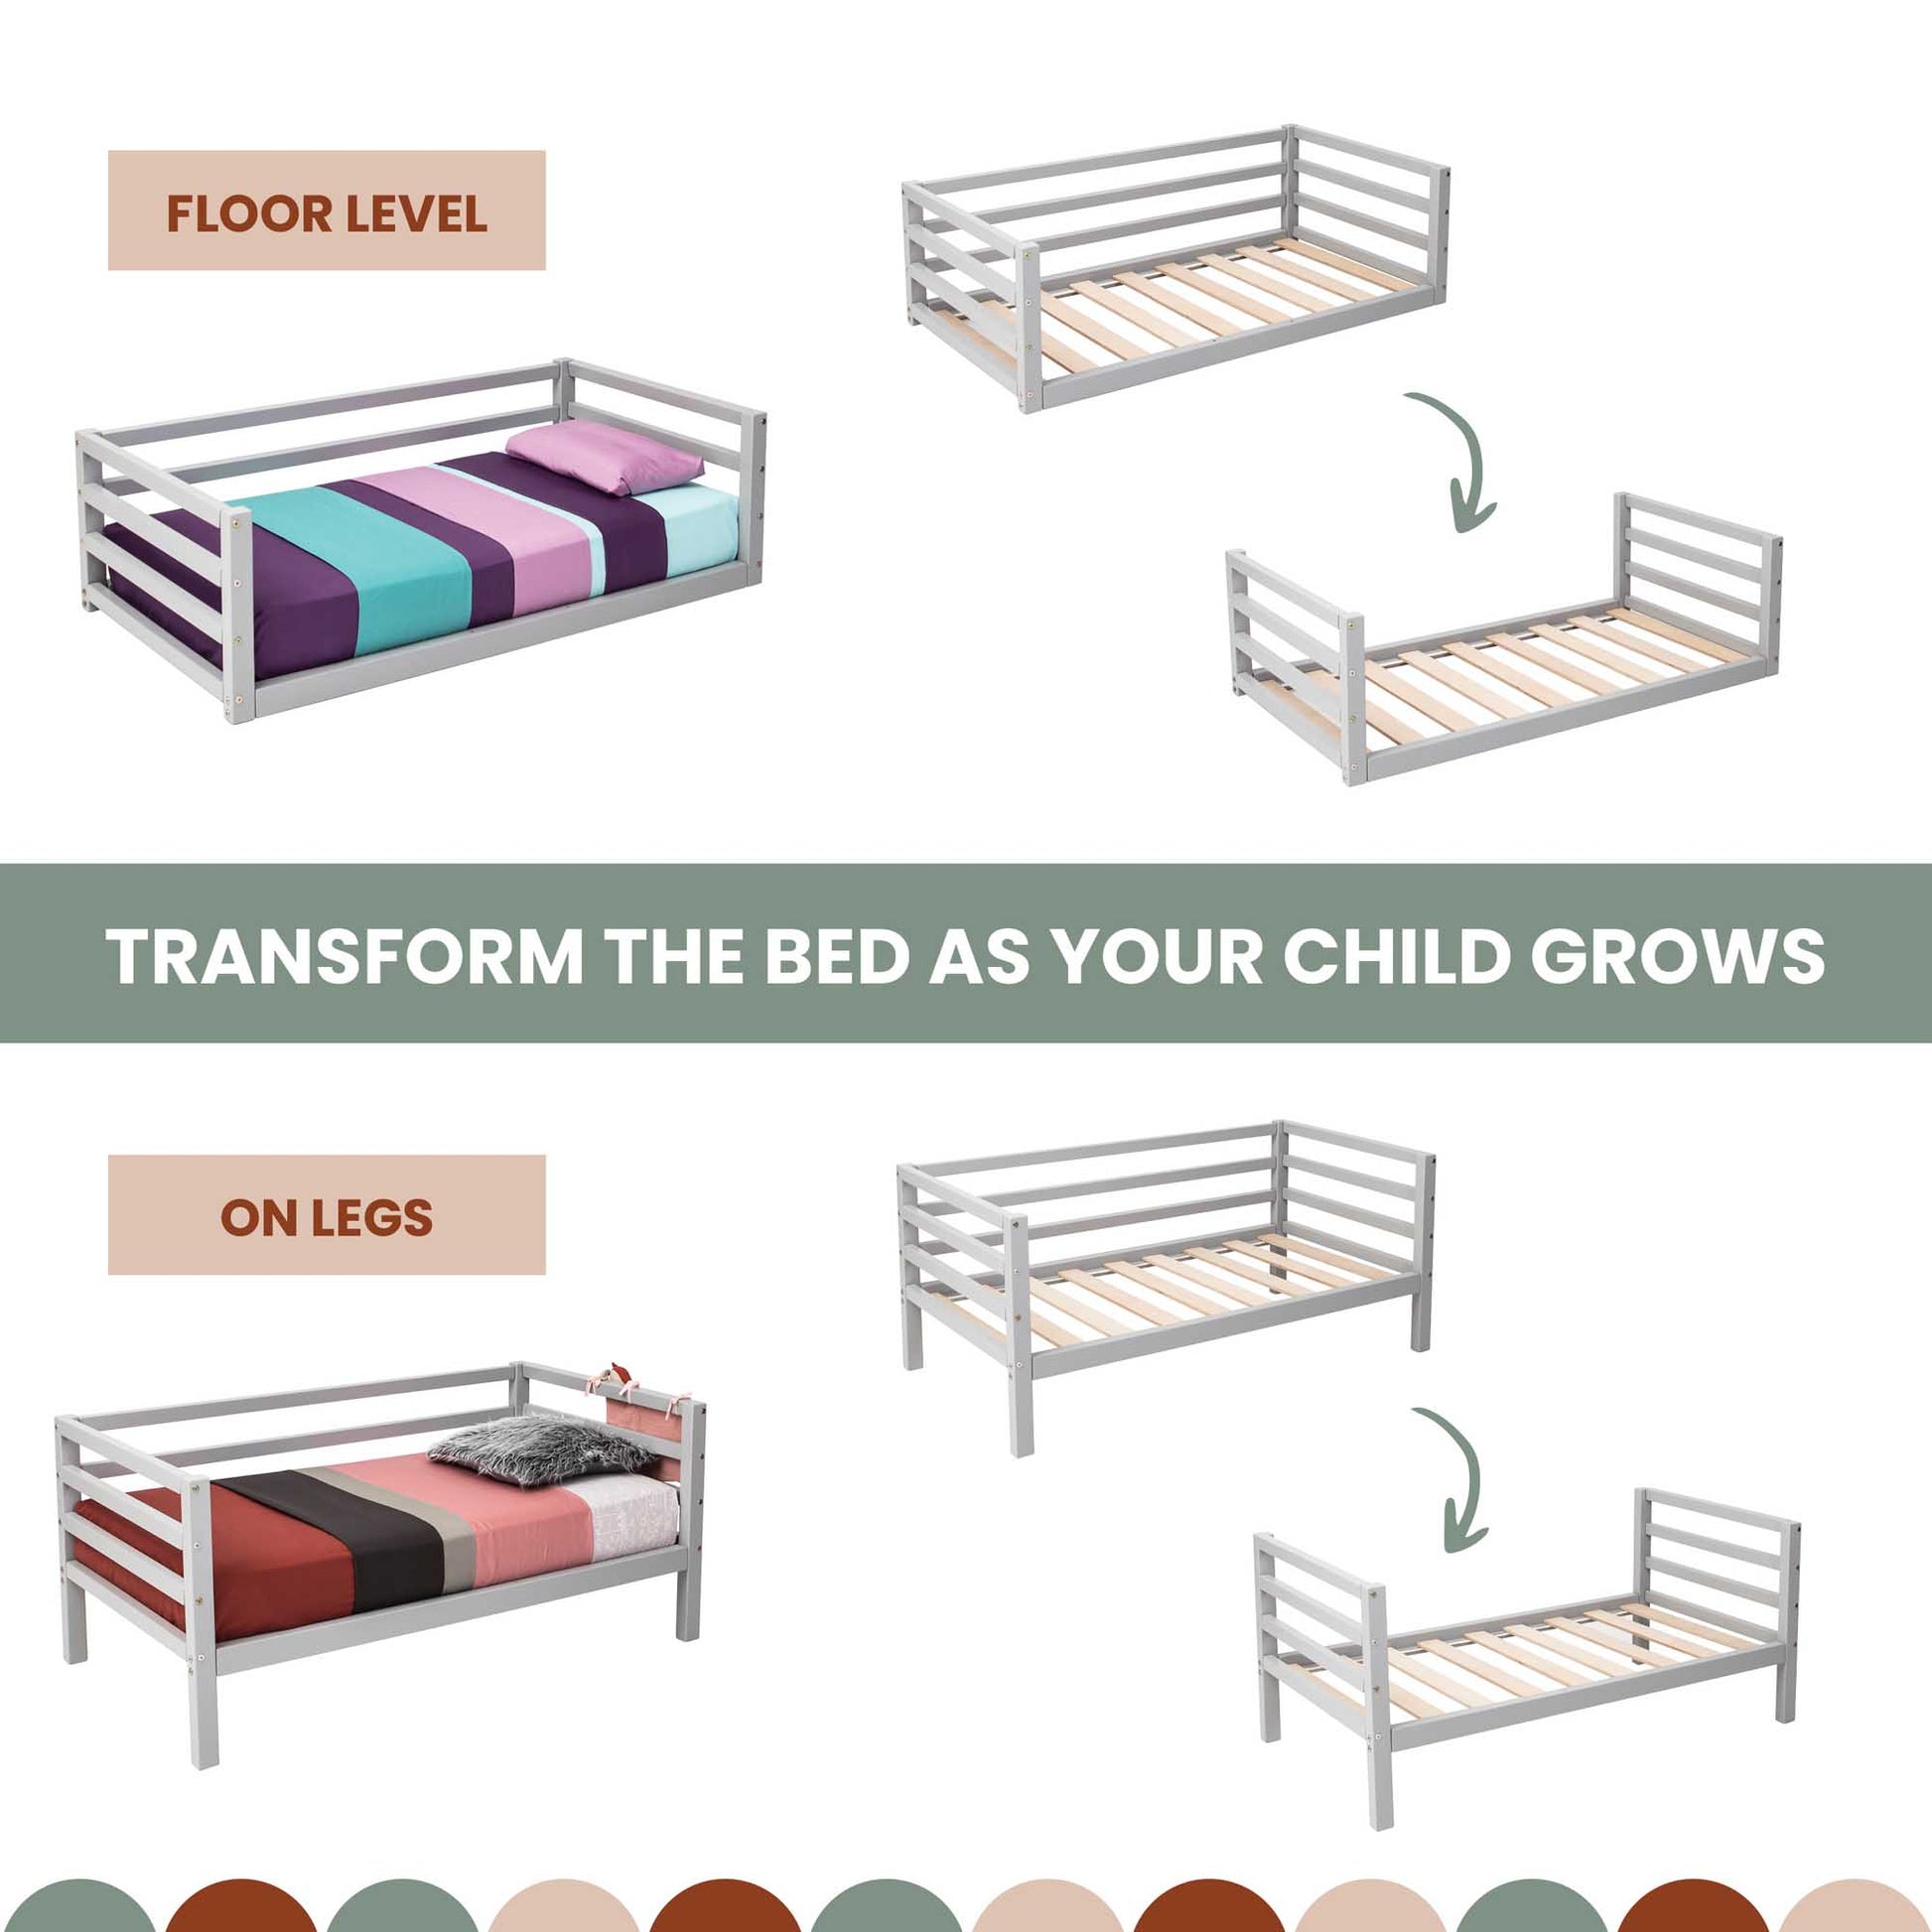 A picture of the Sweet Home From Wood 2-in-1 transformable kids' bed with a 3-sided horizontal rail, perfect for boys, that transforms as your child grows.